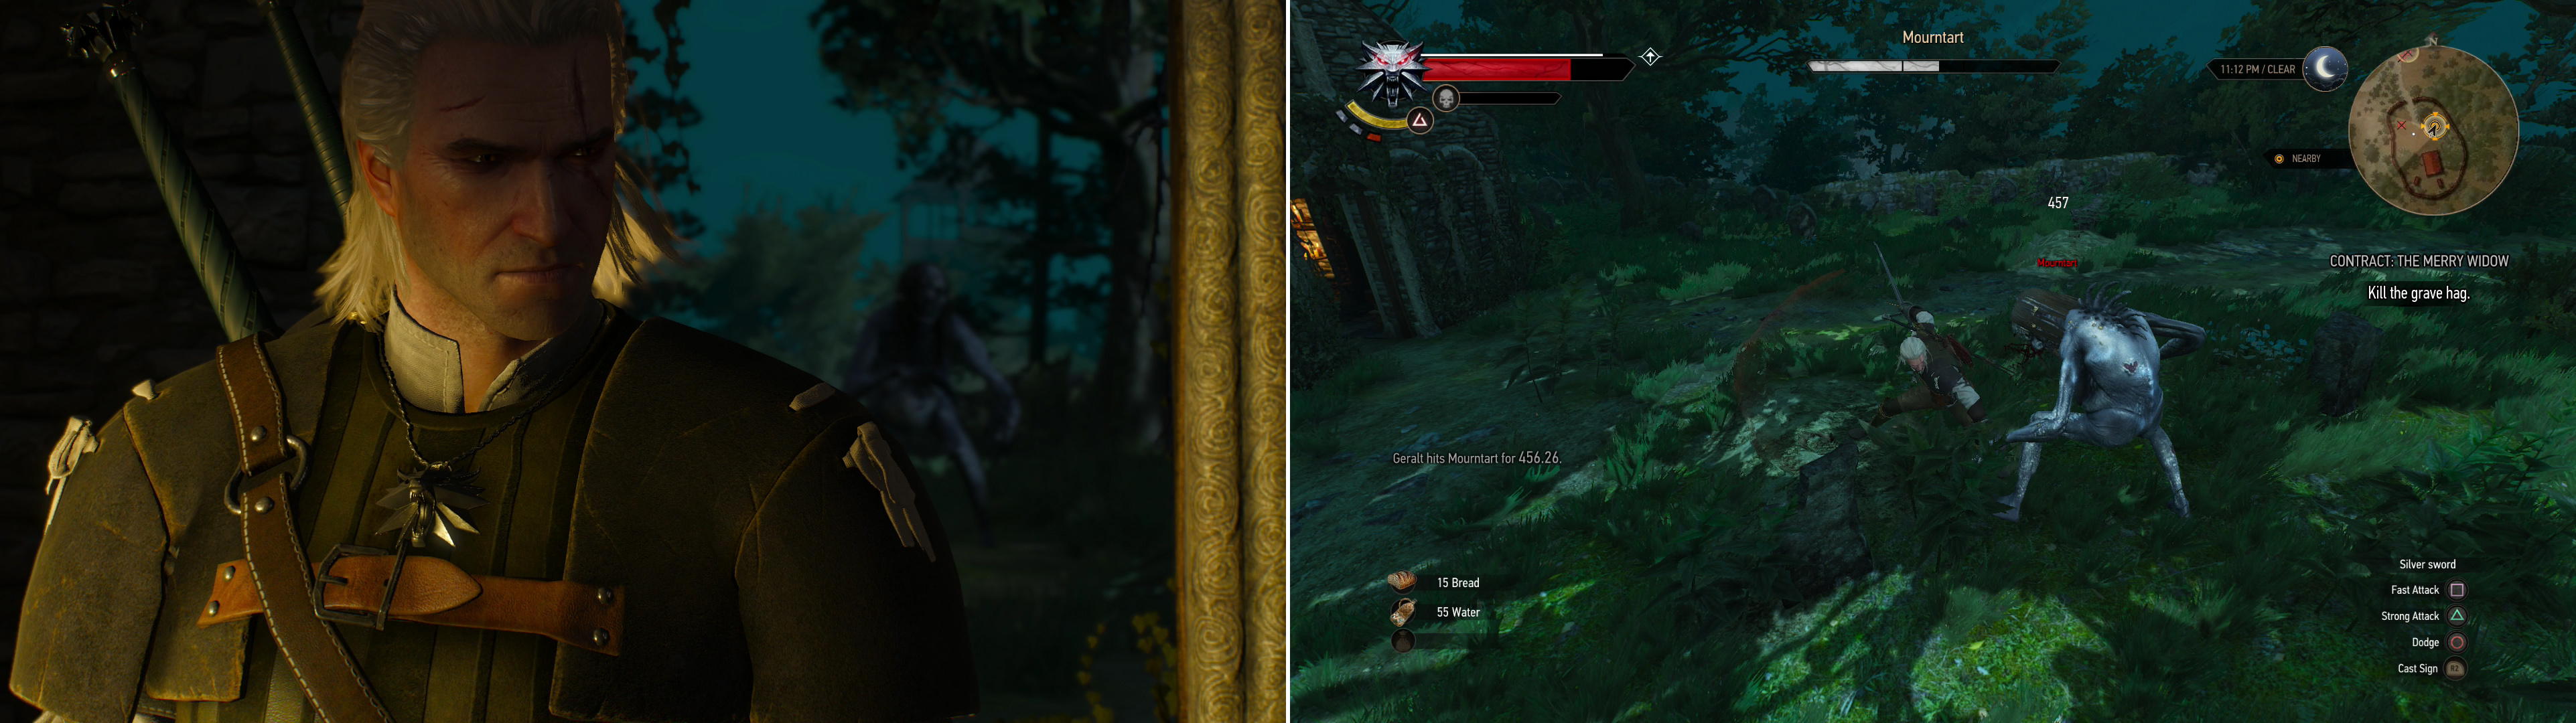 Take the Grave Hag Skulls to lure the beast out into the open (left) then teach her to fear a Witcher’s blade (right).